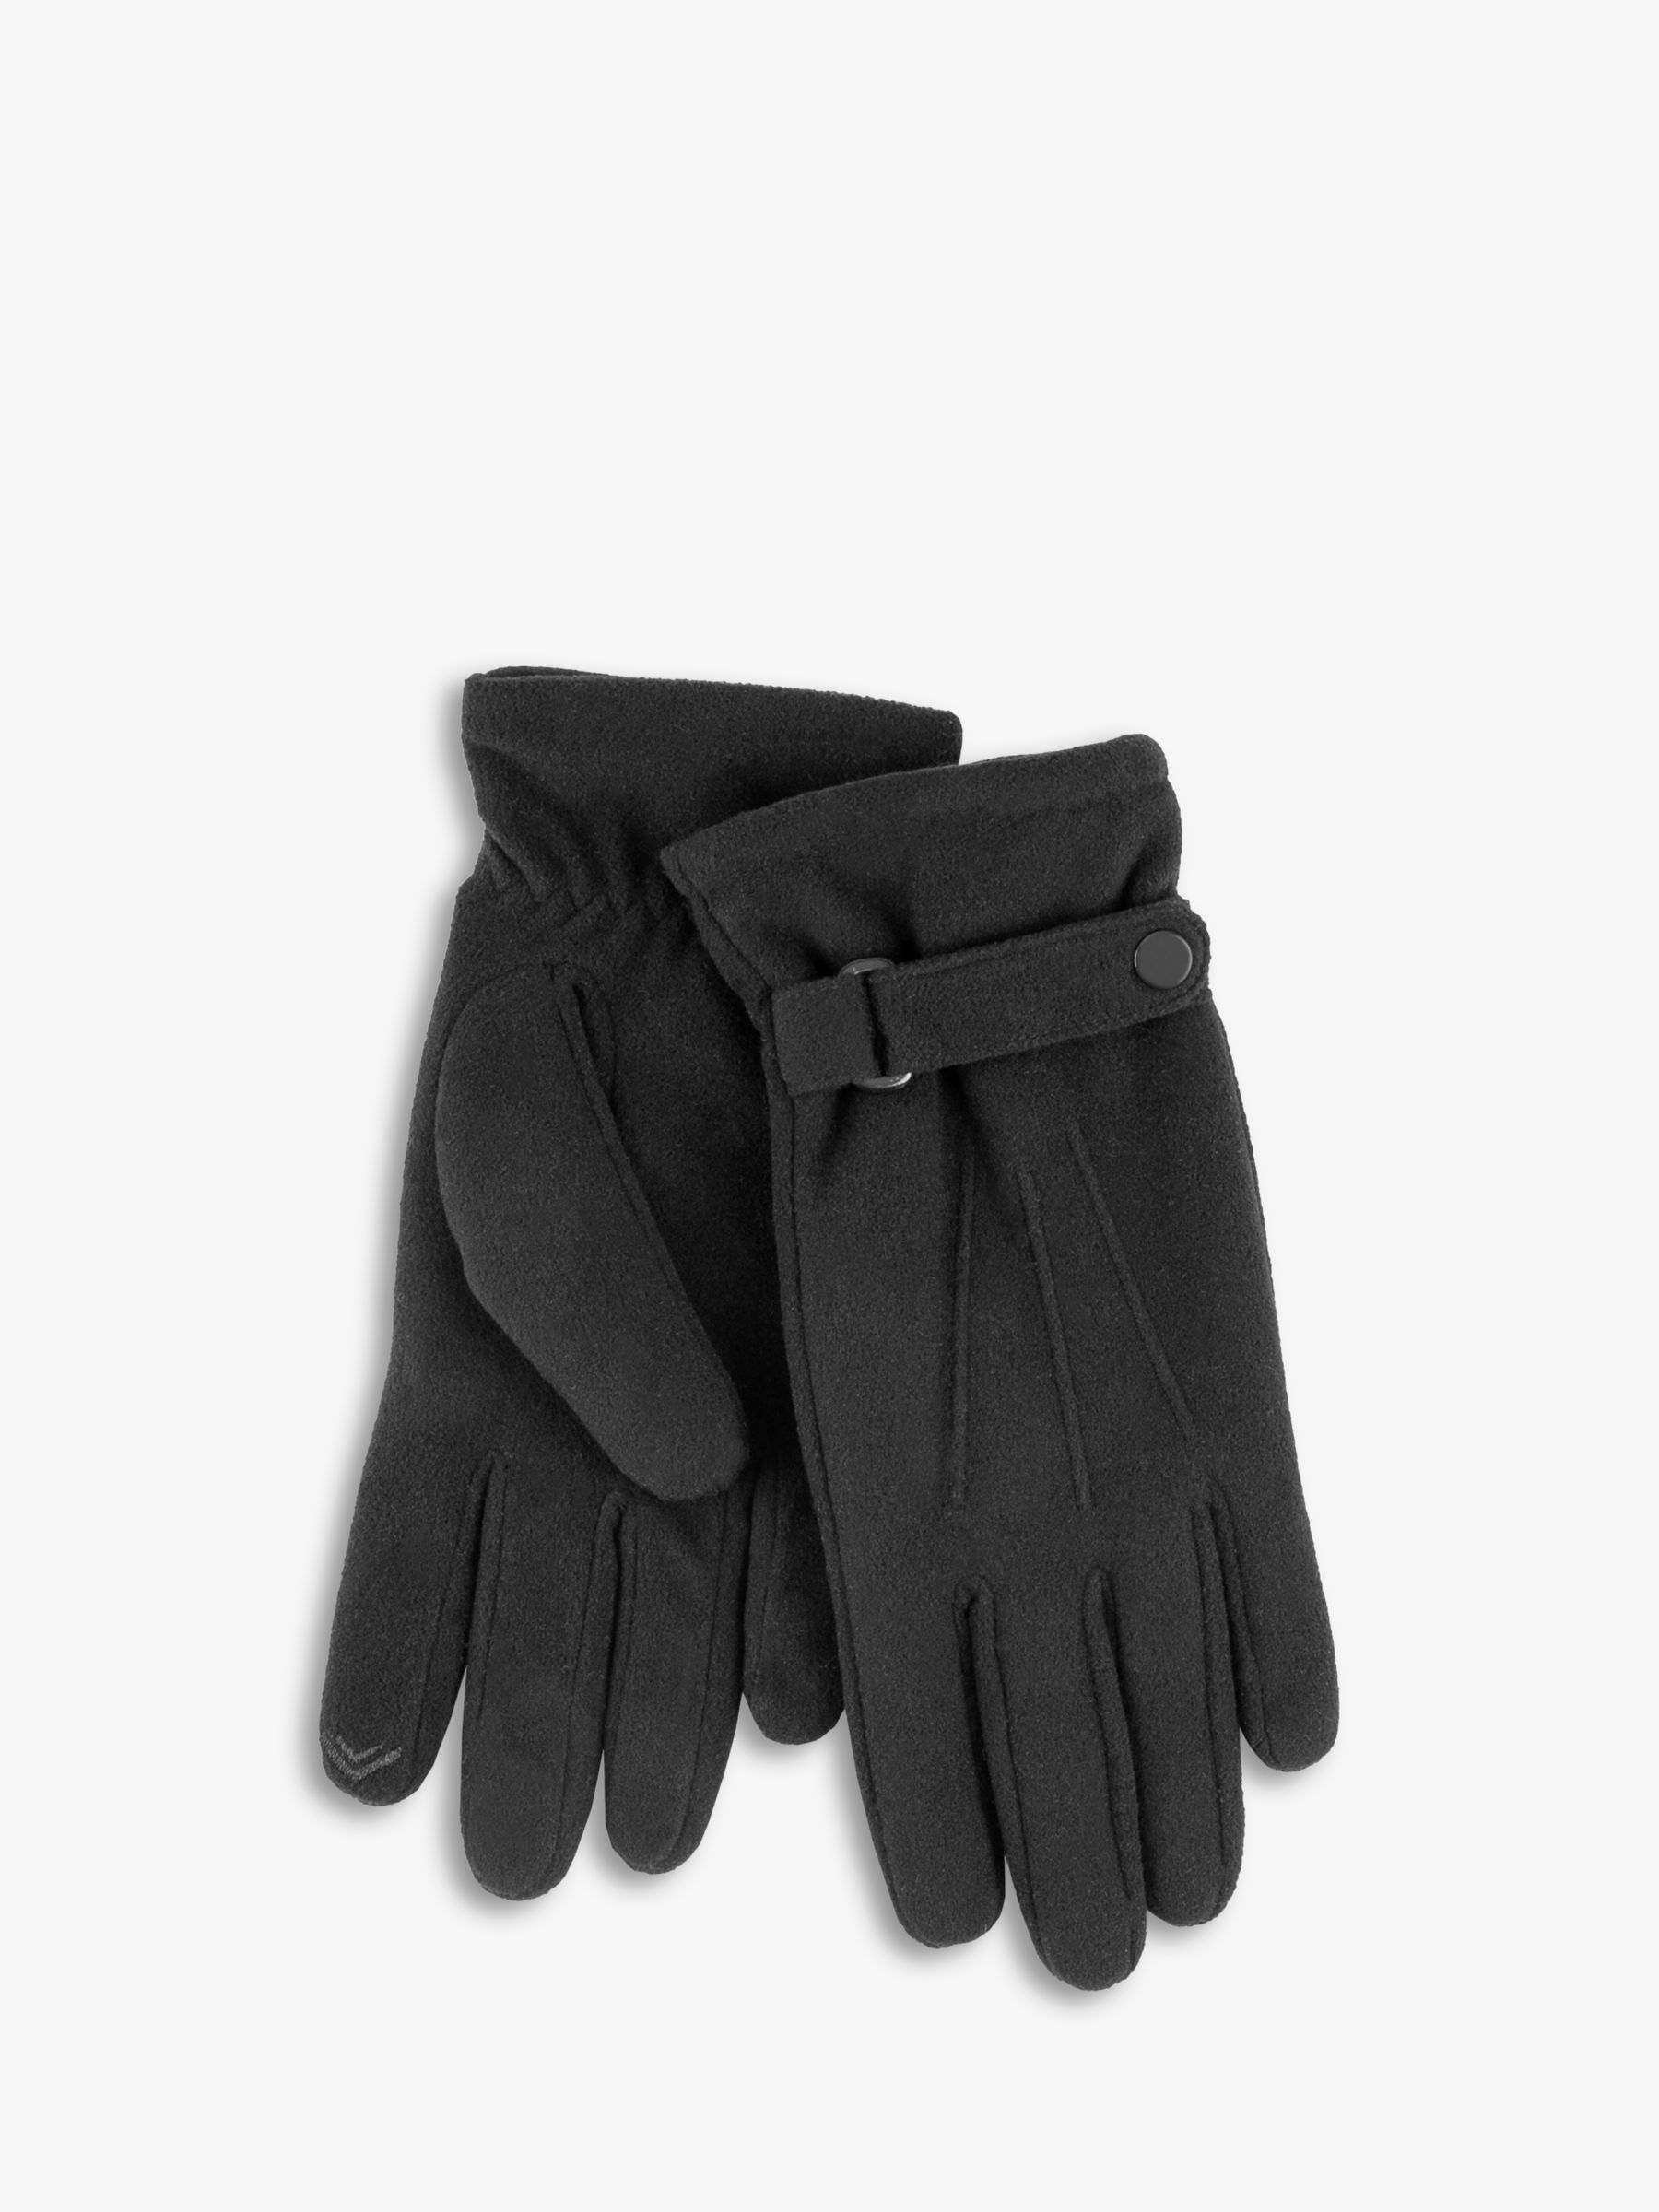 totes Fleece Smartouch Gloves, Black at John Lewis & Partners